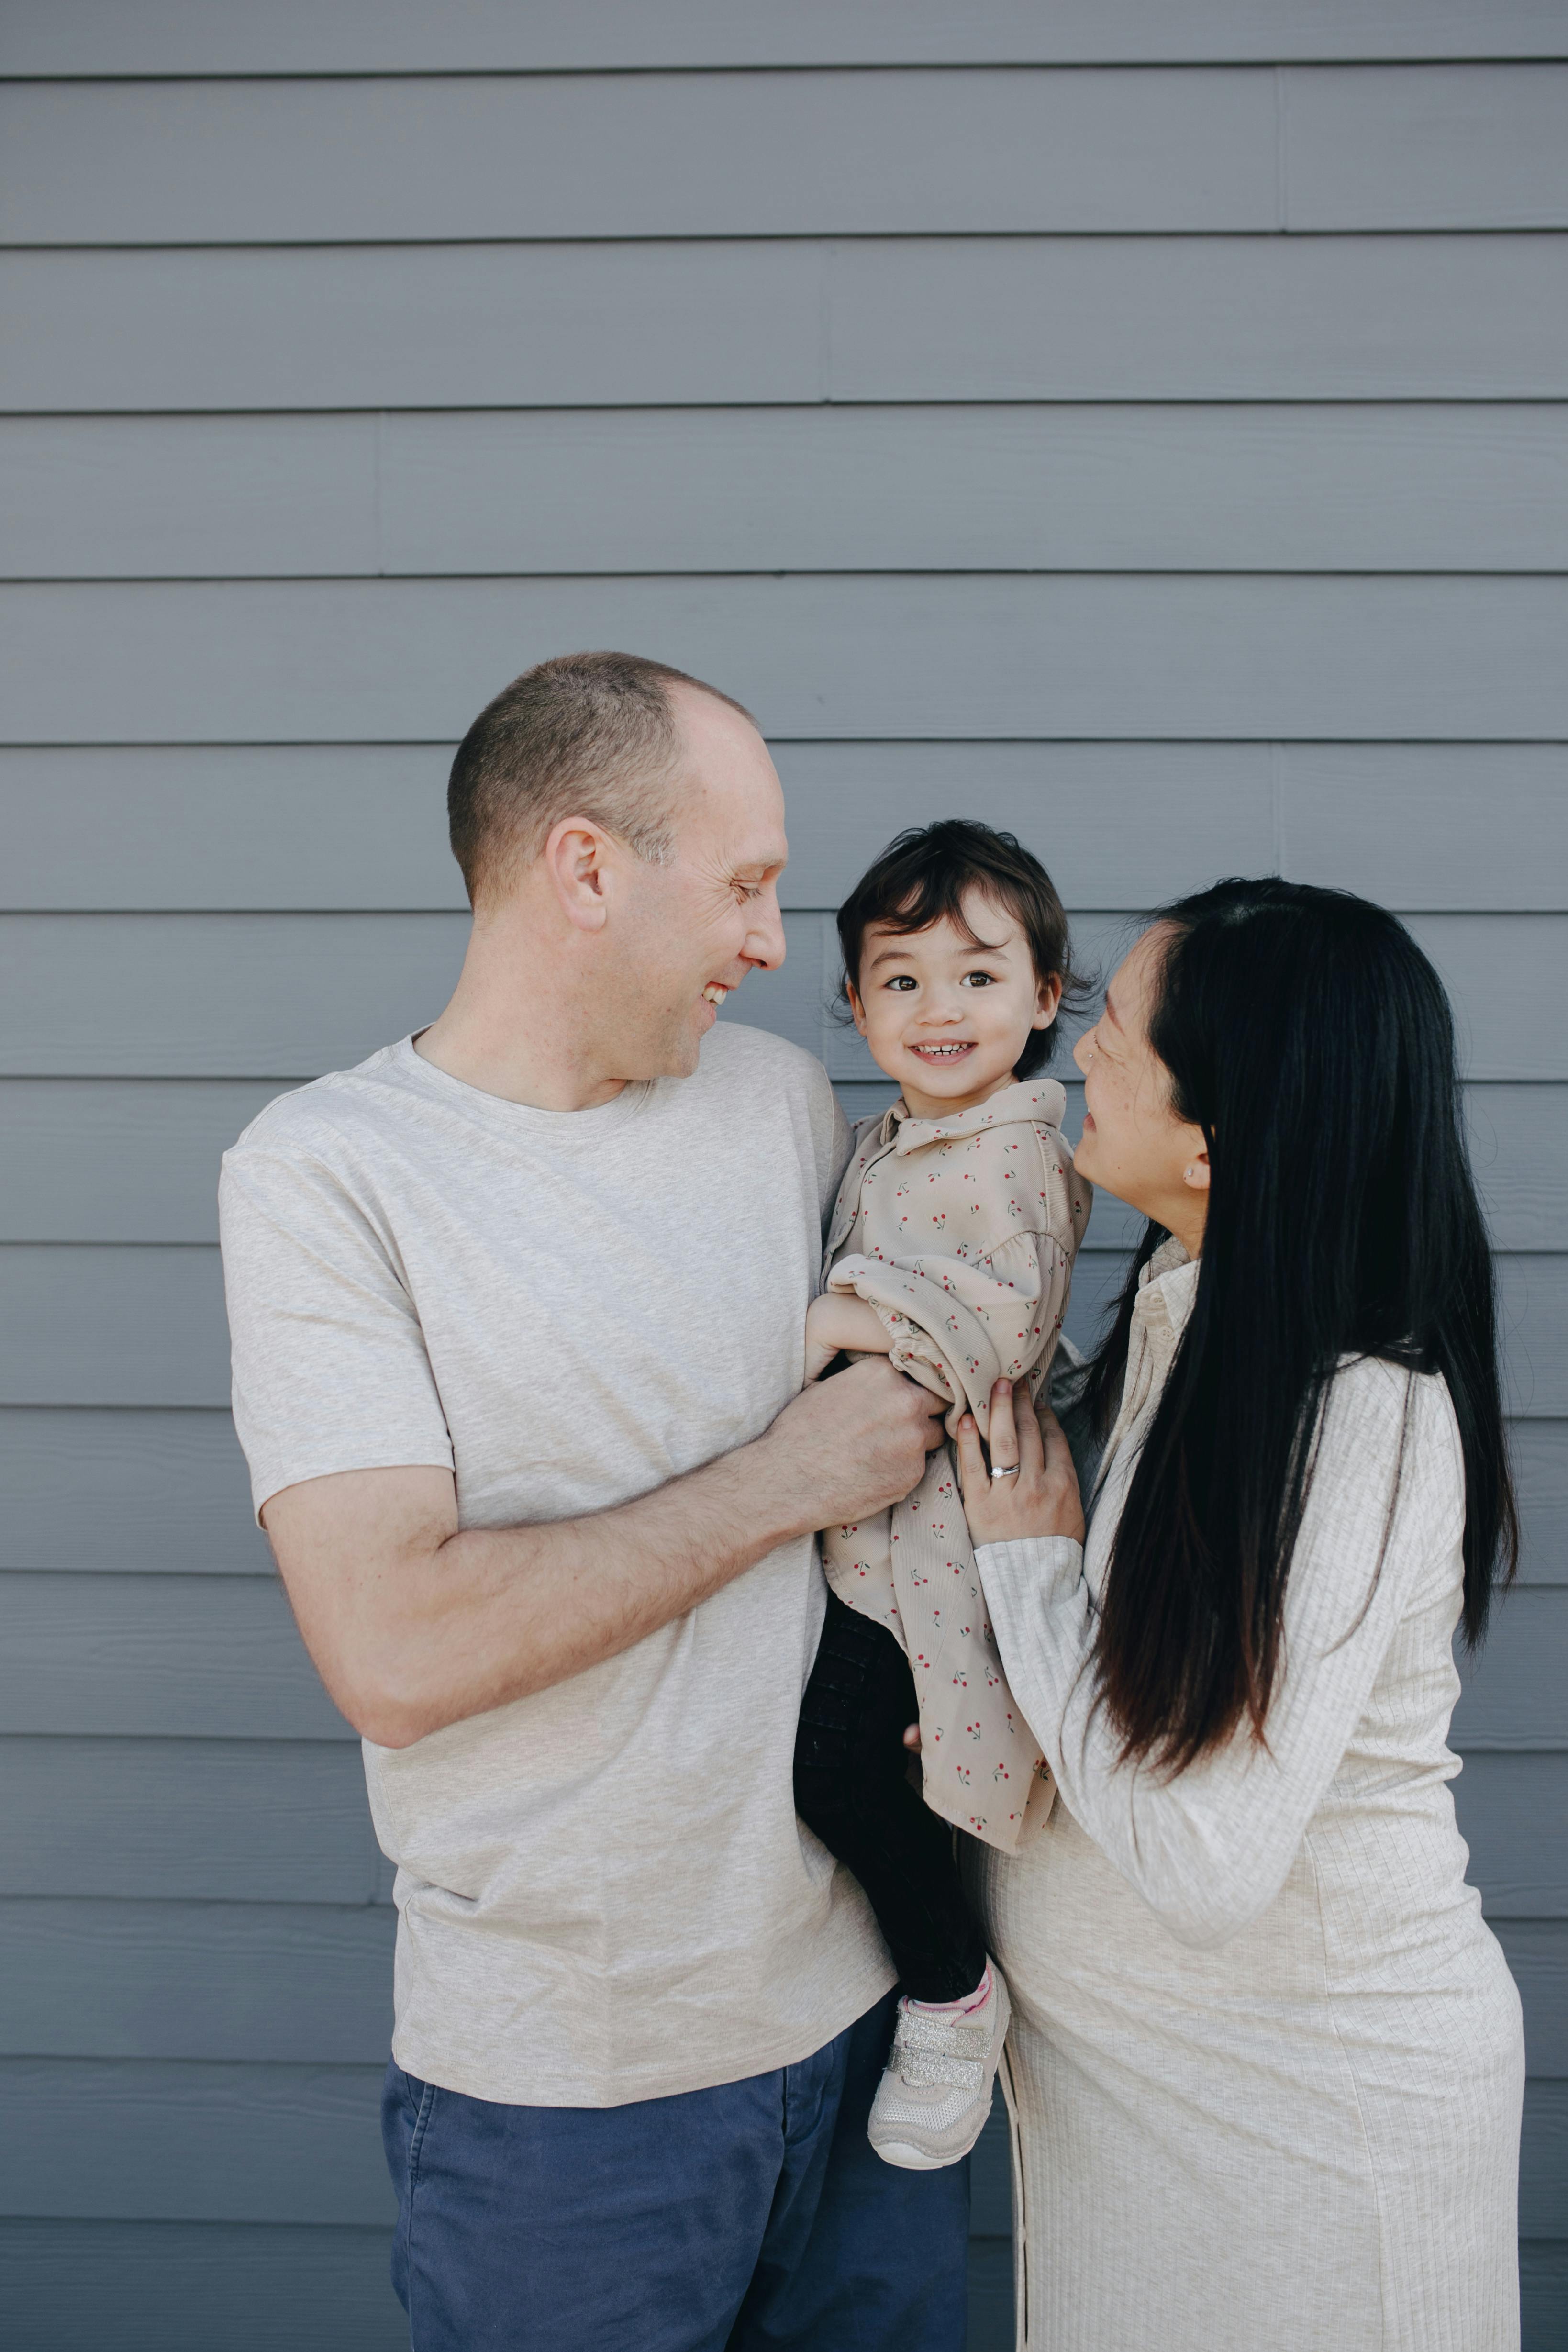 A happy family of three | Source: Pexels